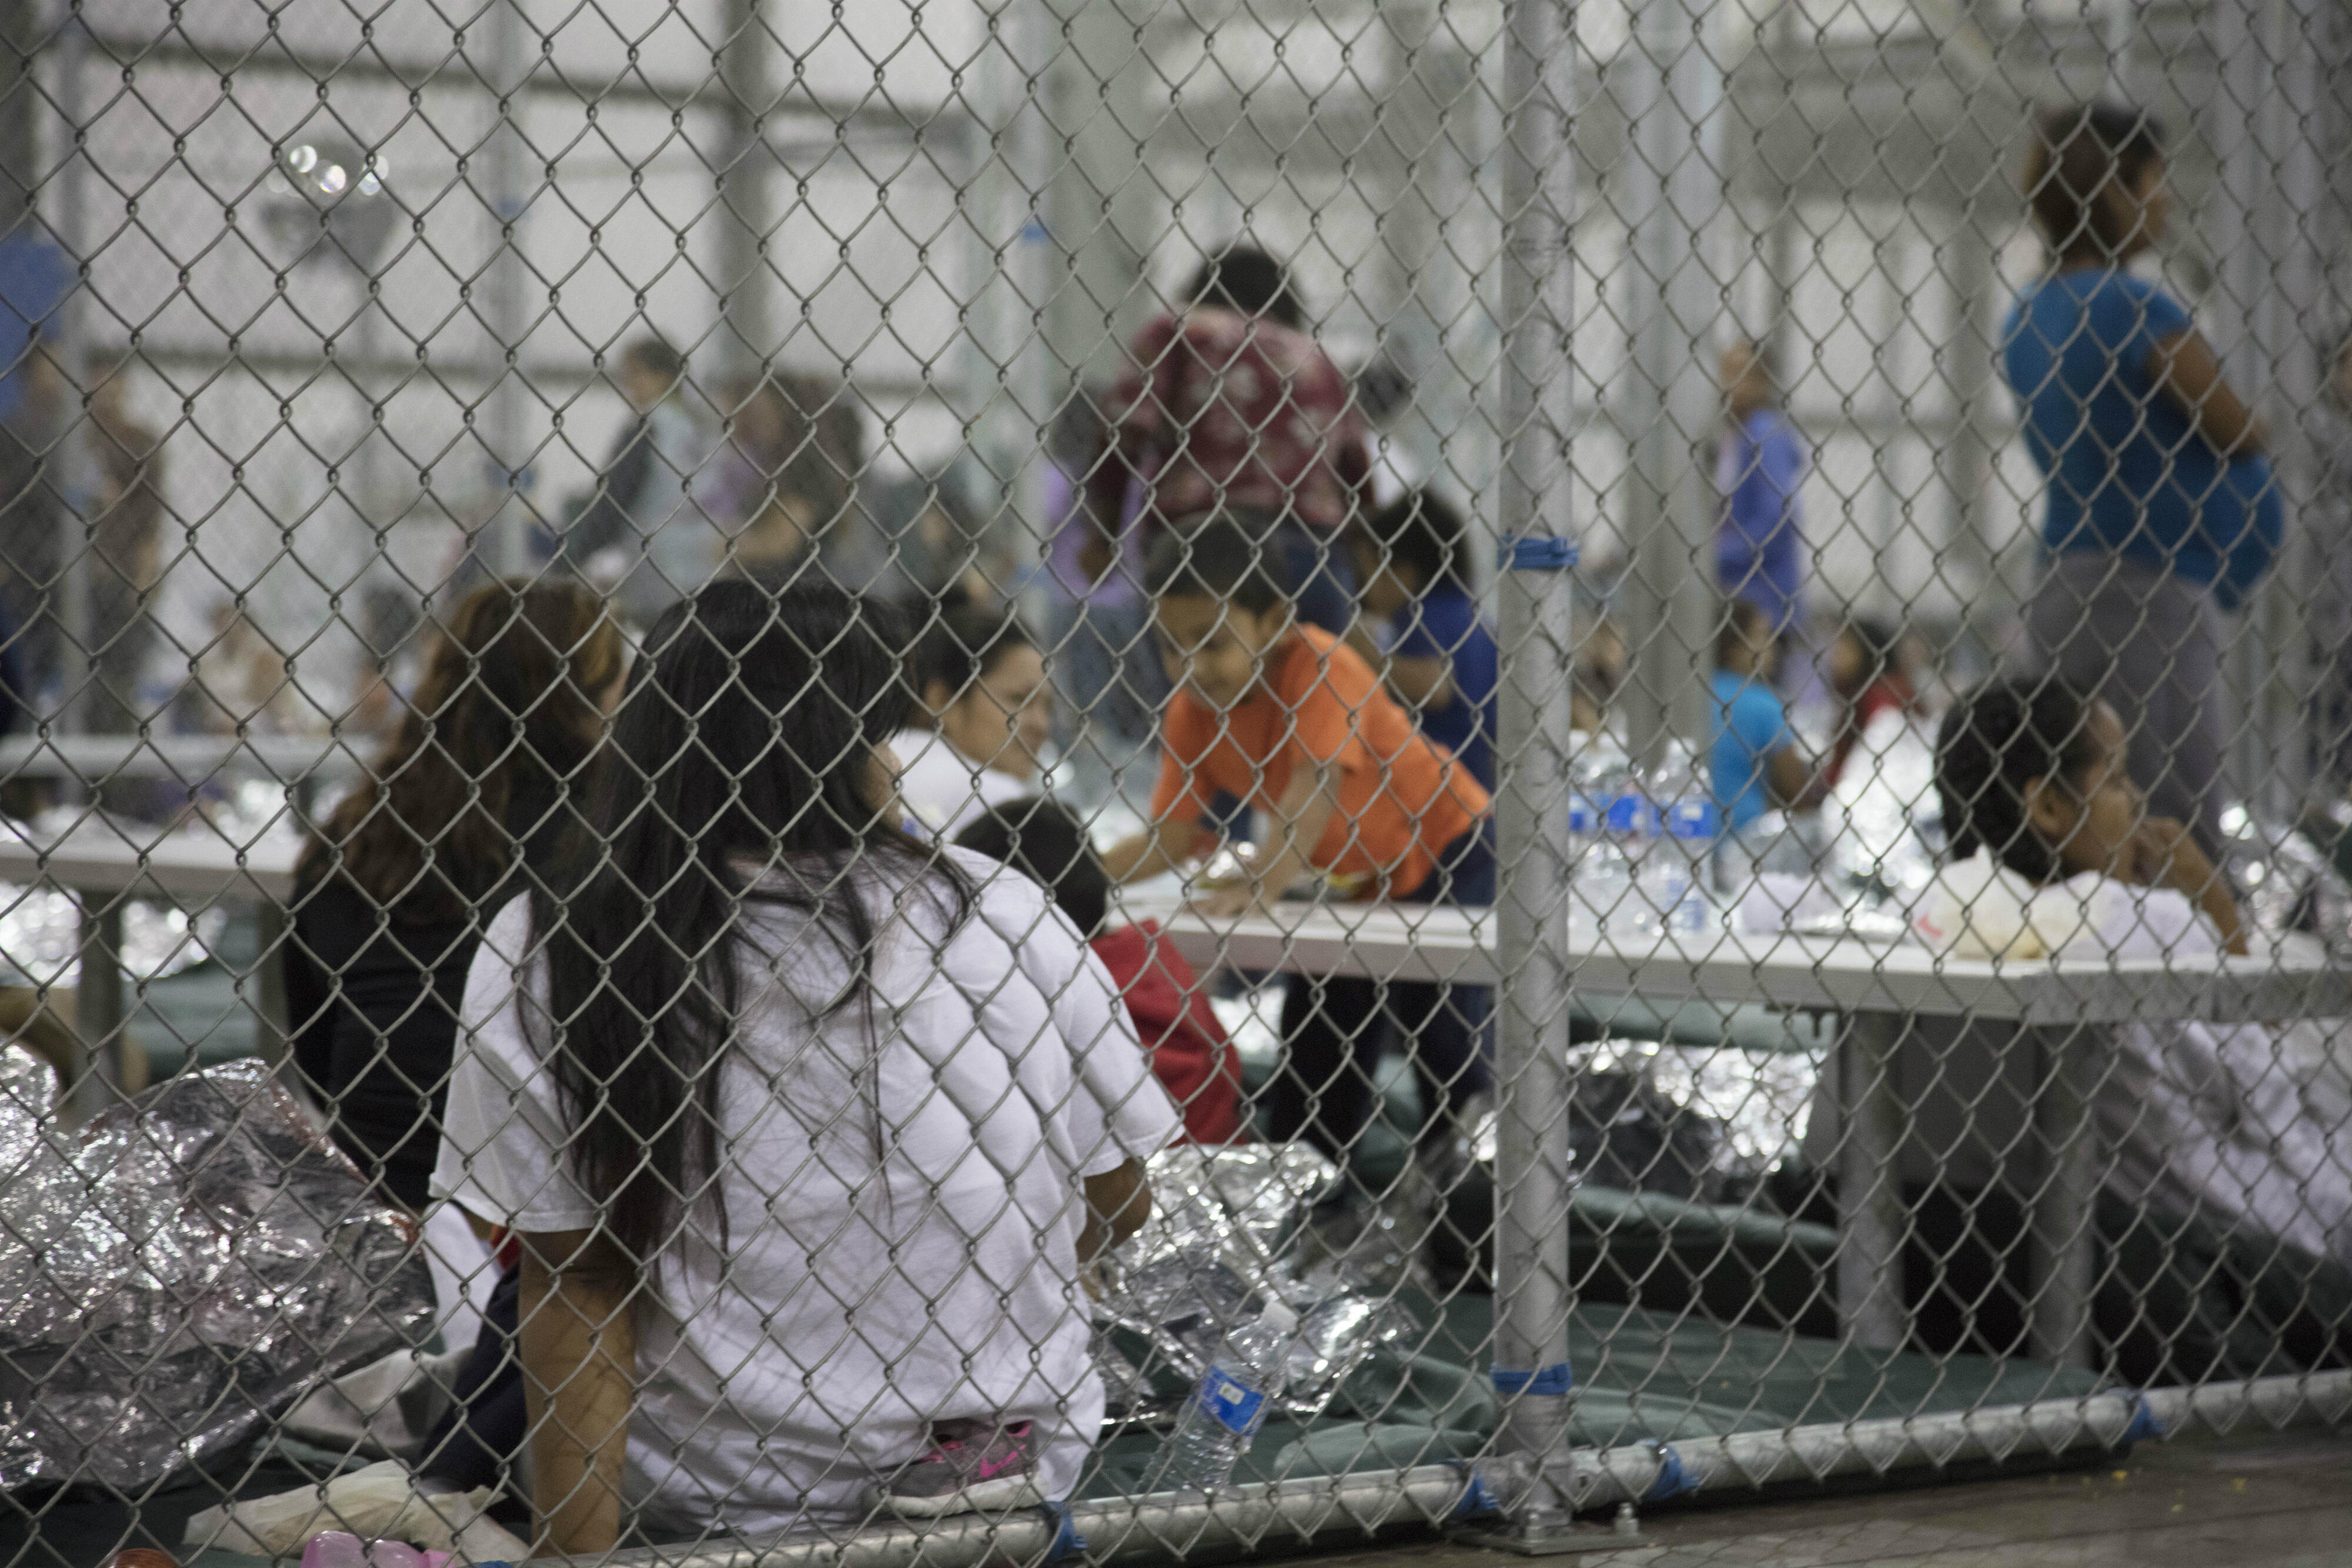 Families detained behind a chain-link fence inside a U.S. Border Patrol facility in Texas 